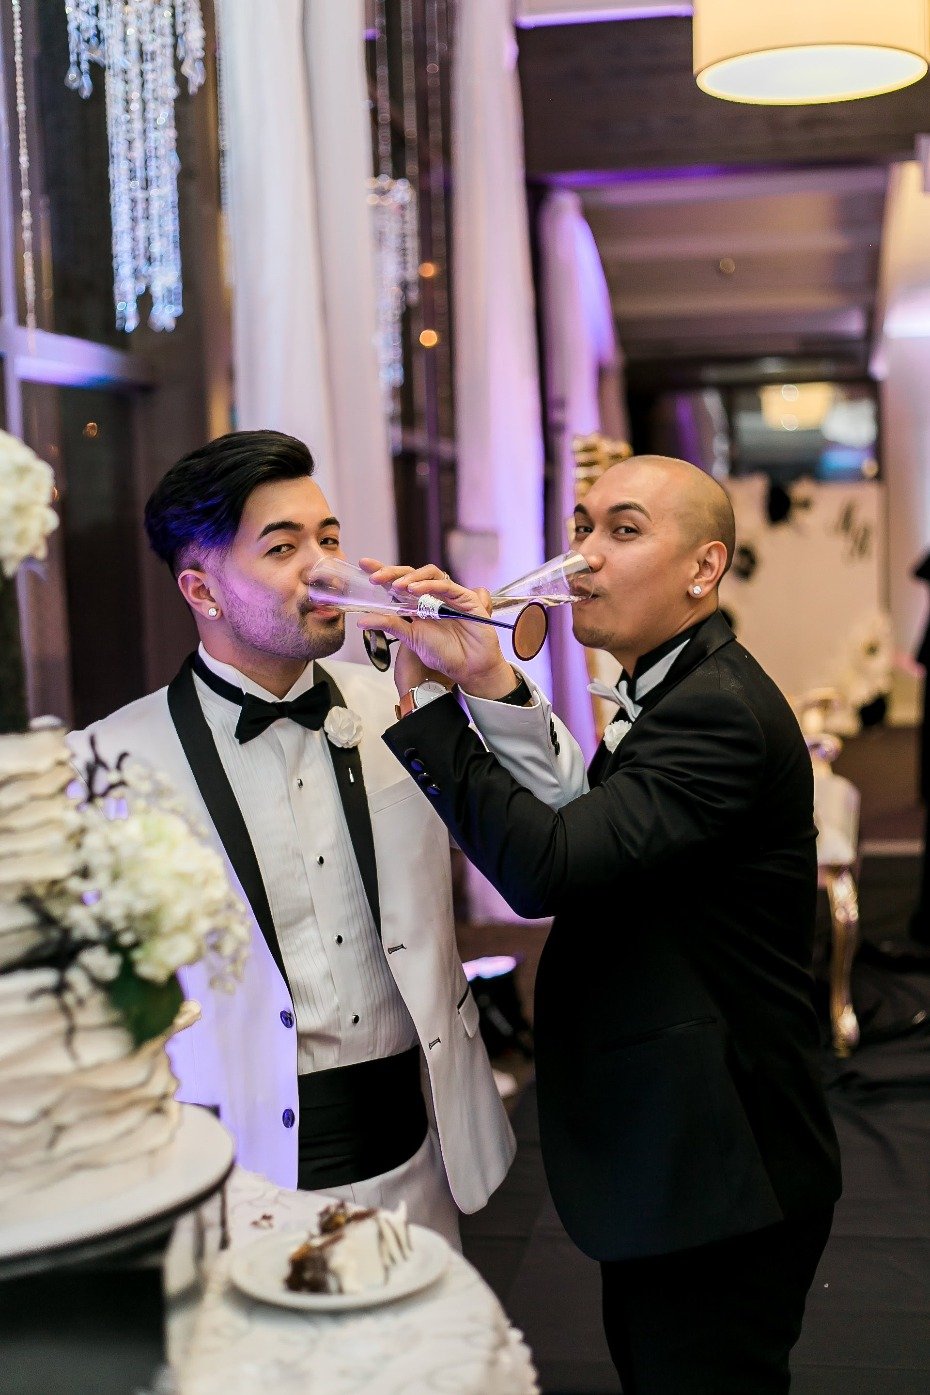 Champagne toast to the newlyweds!